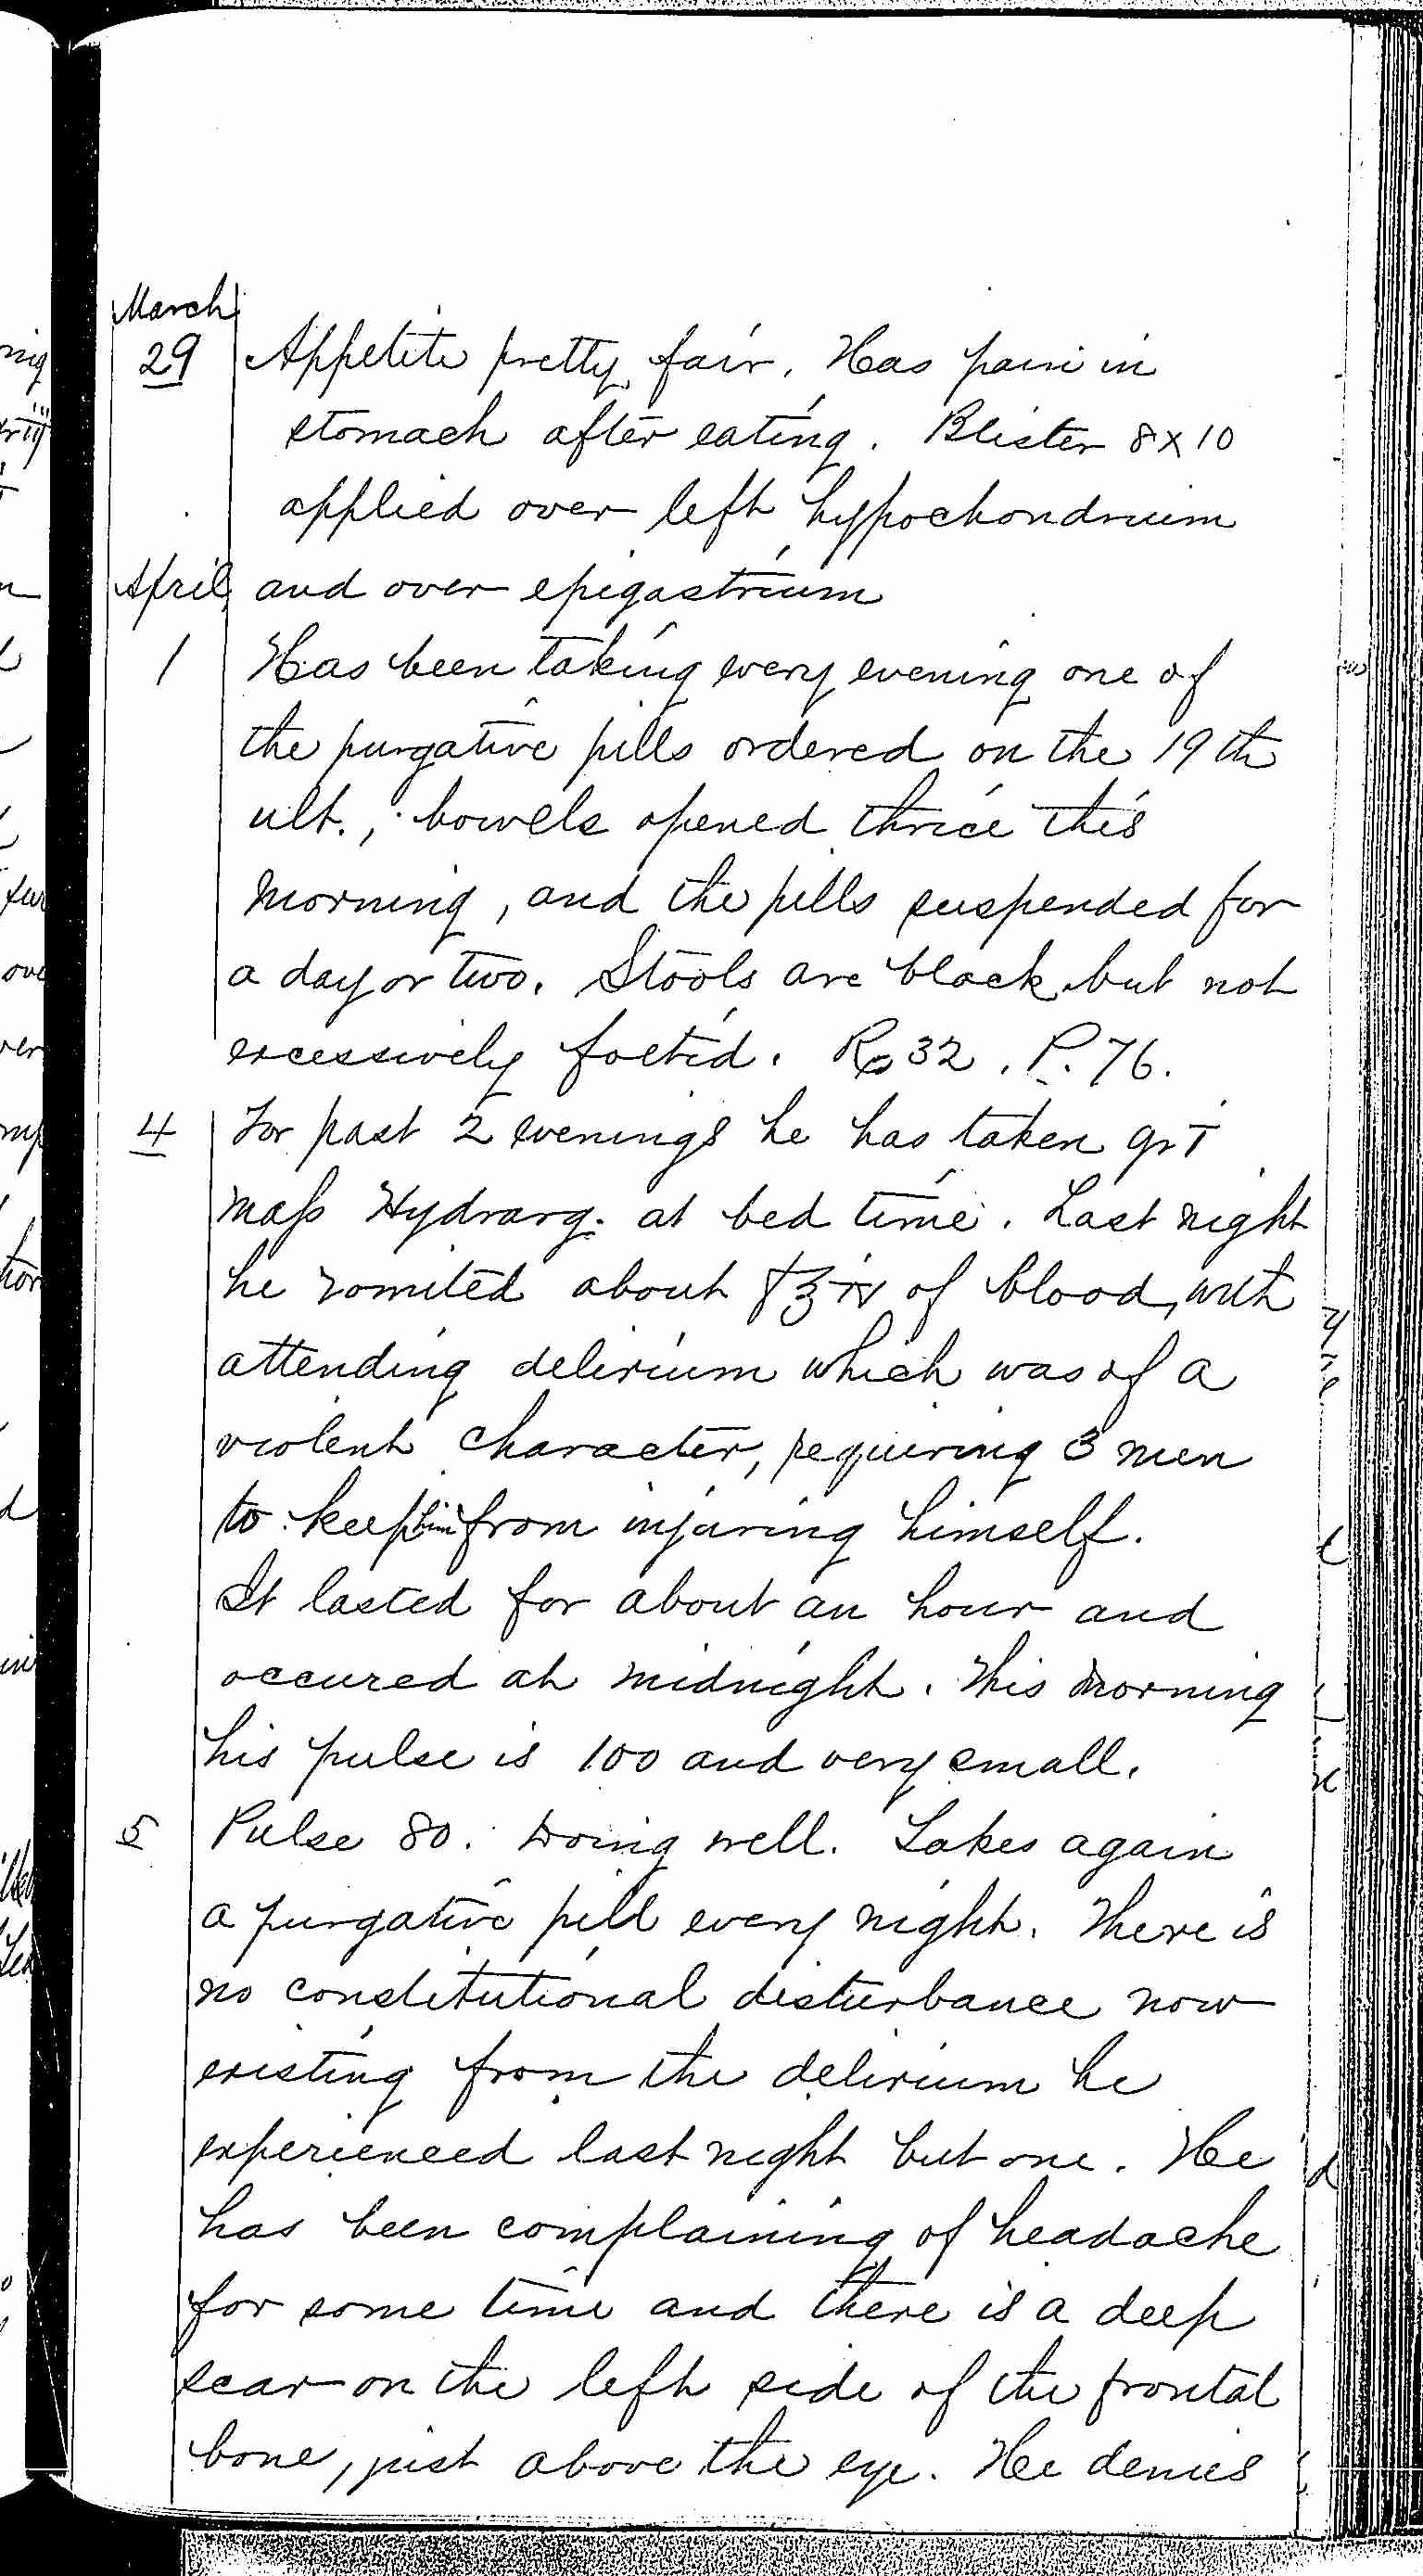 Entry for Charles Johnson (page 9 of 15) in the log Hospital Tickets and Case Papers - Naval Hospital - Washington, D.C. - 1868-69